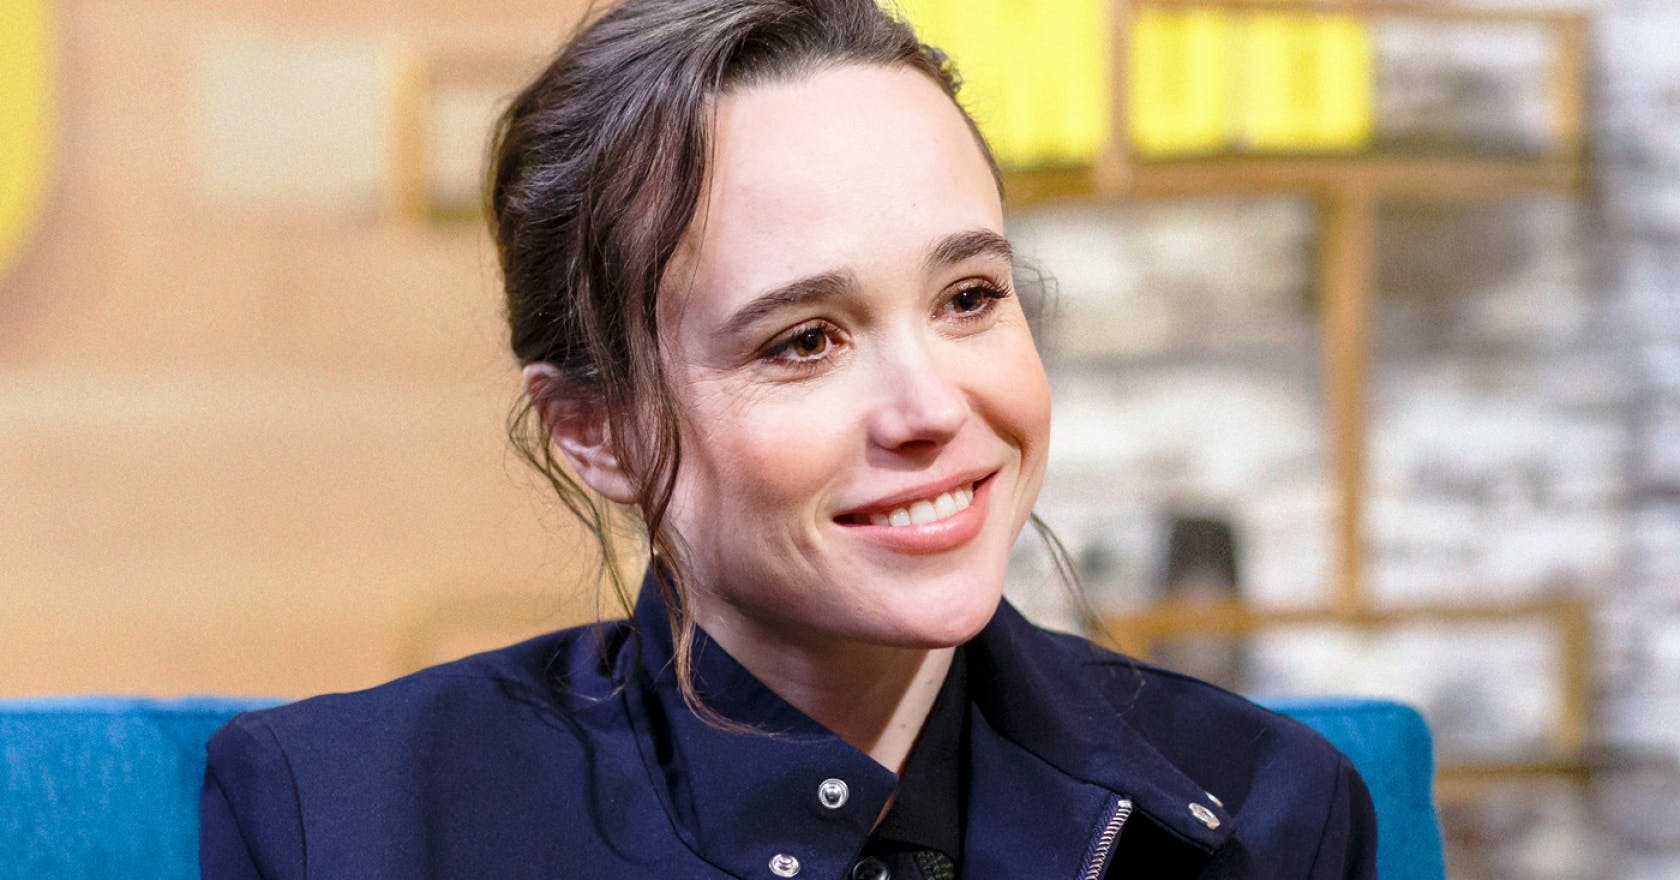 WATCH Ellen Page blast Donald Trump and Mike Pence for anti-LGBTQ policies